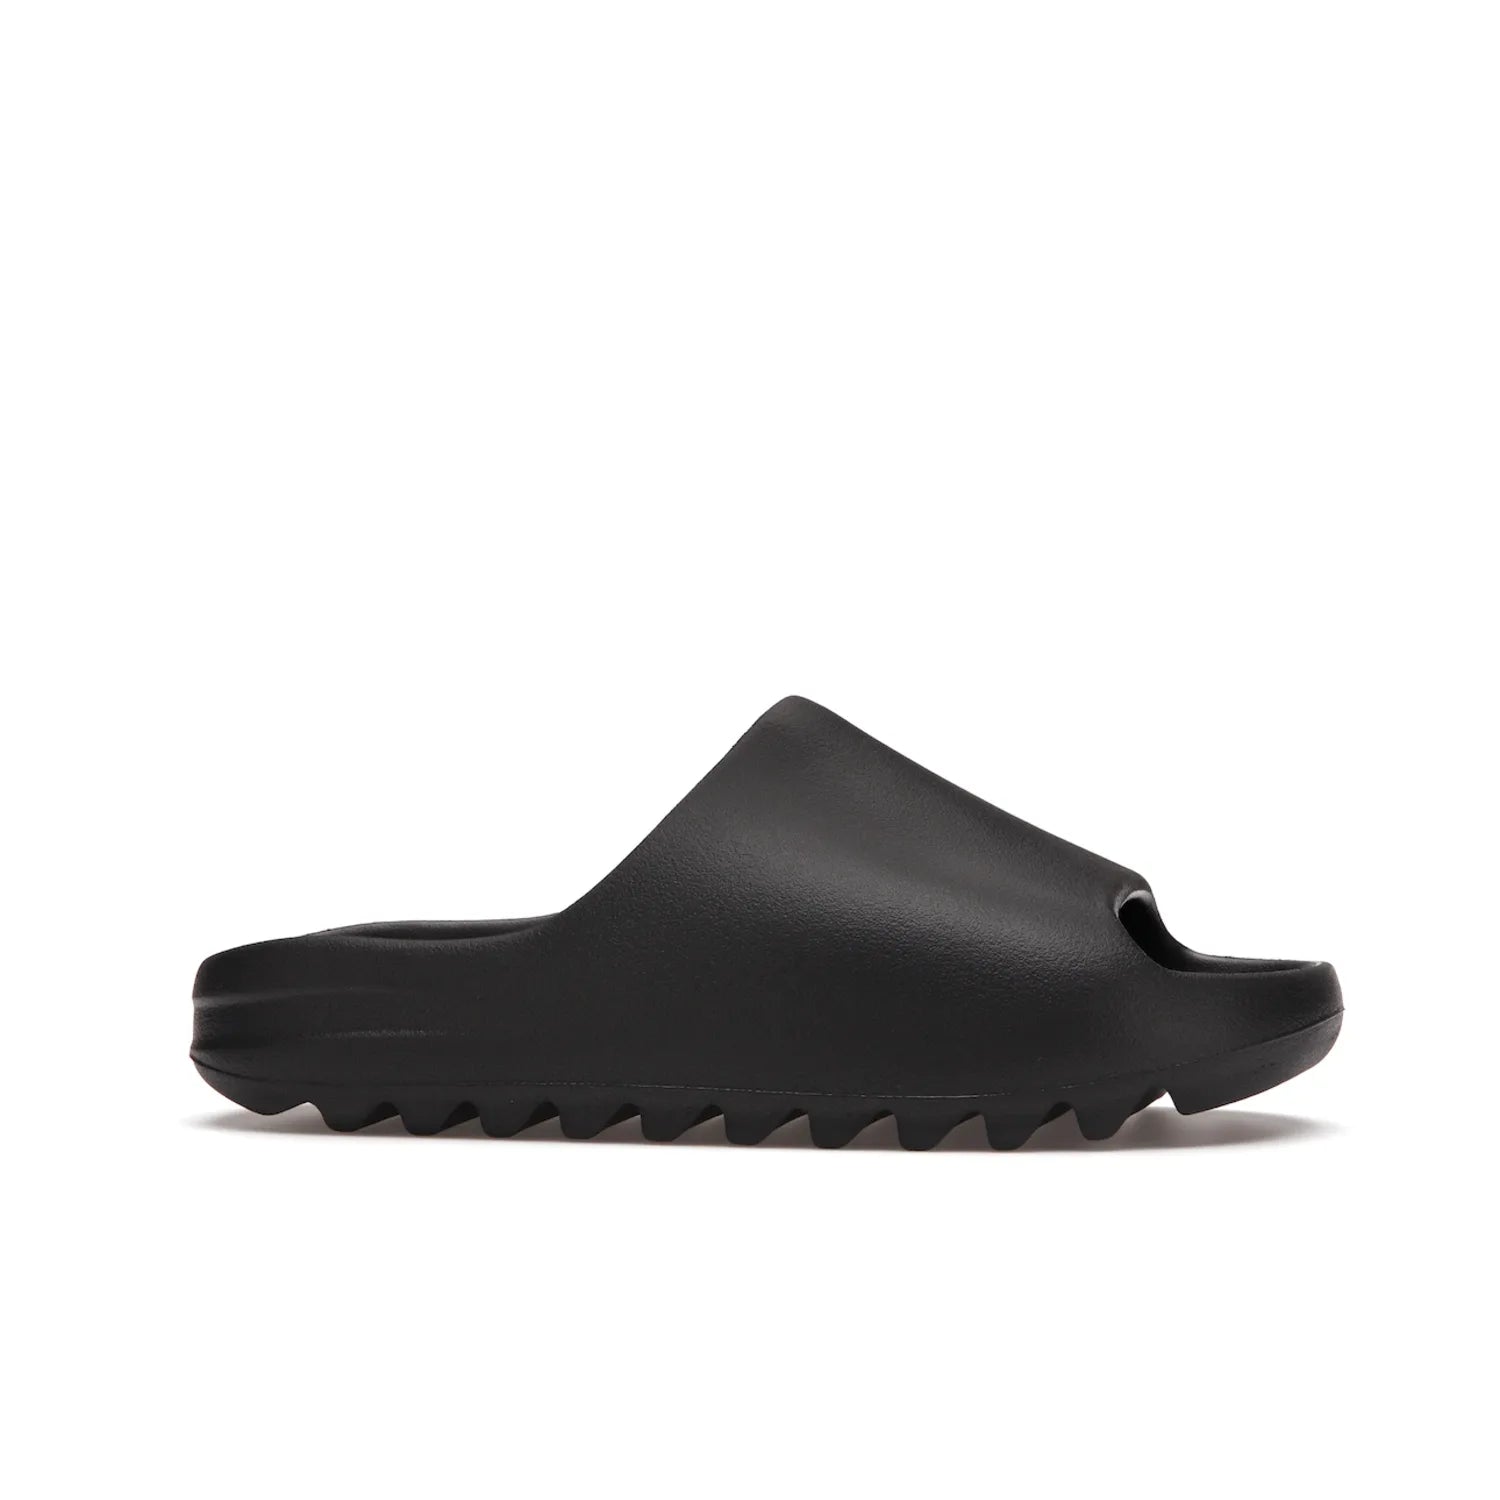 adidas Yeezy Slide Onyx - Image 2 - Only at www.BallersClubKickz.com - Step into comfort and style with the adidas Yeezy Slide Onyx. Featuring foam construction, an all-black colorway and a grooved outsole for stability and responsiveness, this versatile slide is a must-have for your collection.